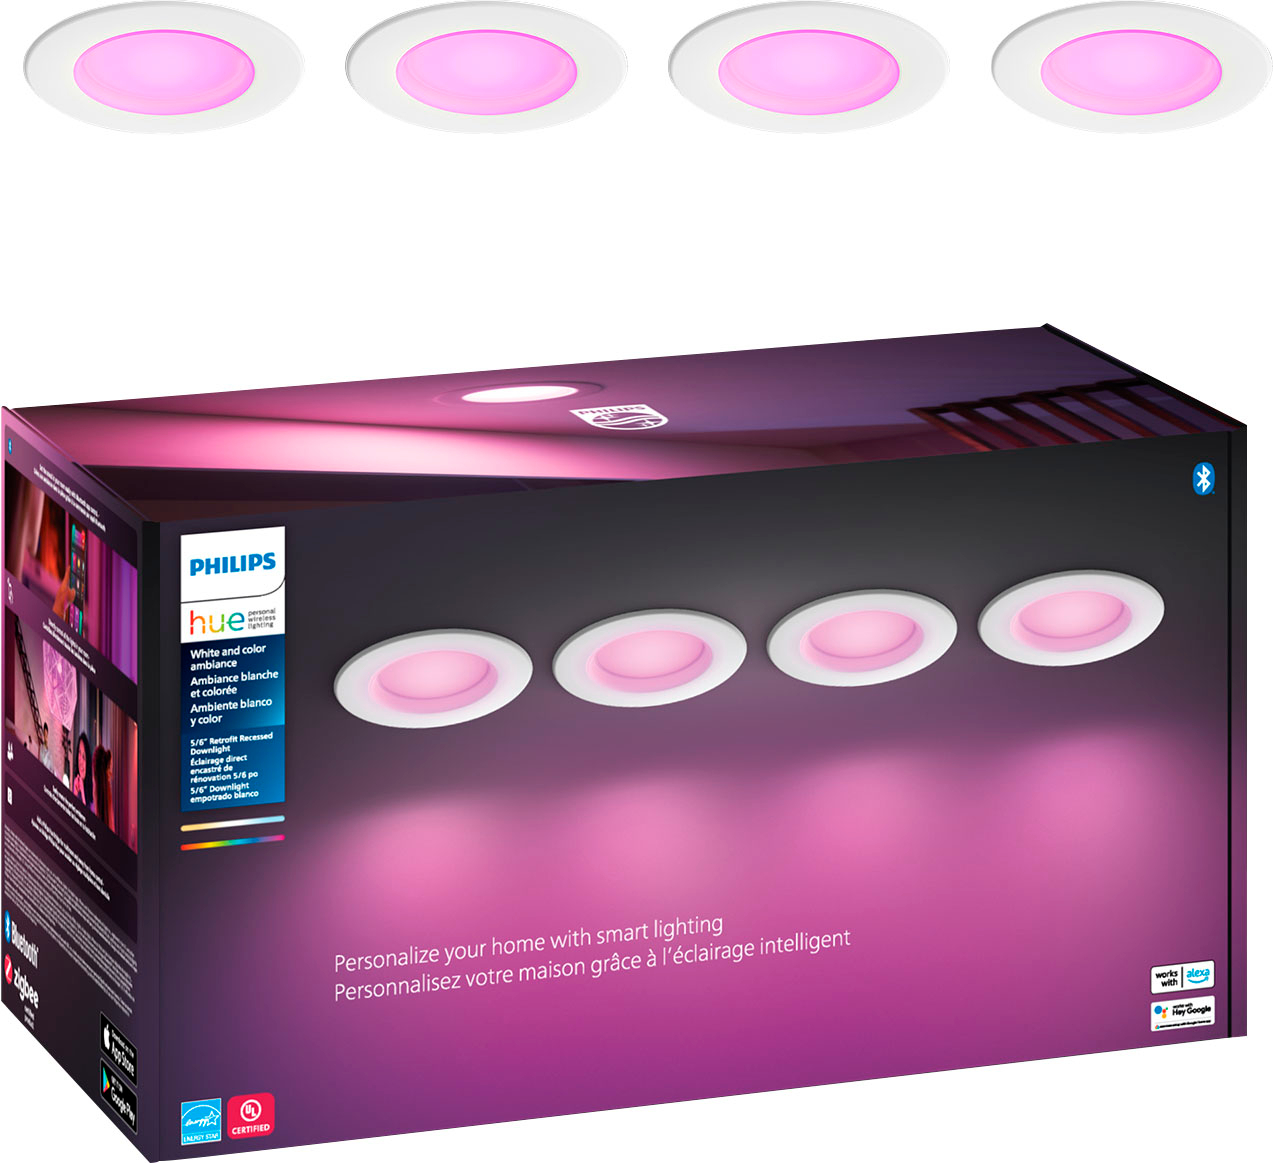 Philips Hue White and Color Ambiance 5-6" Lumen Recessed Downlight (4-pack) White 578674 - Best Buy